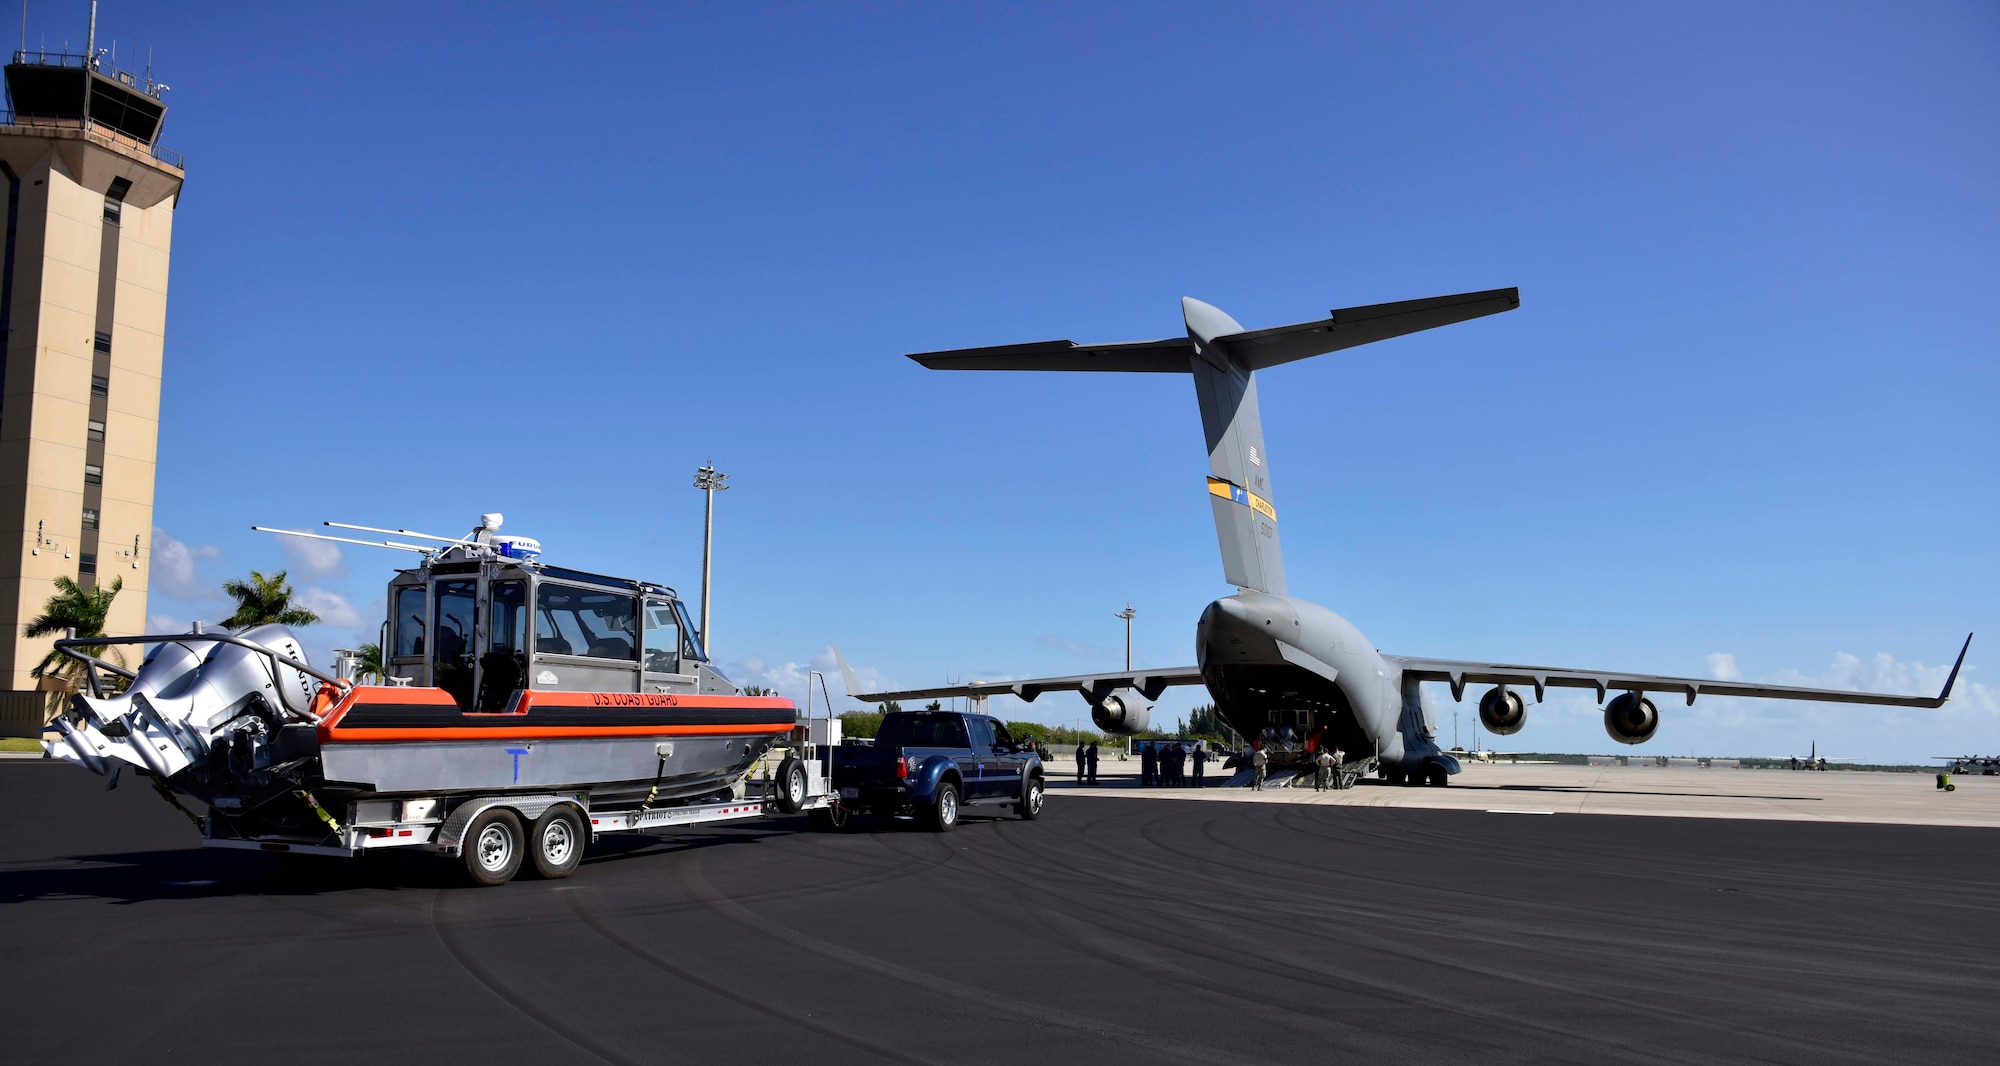 Members of Coast Guard Maritime Safety and Security Team Miami prepare load a small boat onto an Air Force C-17 in Homestead, Florida, on Mar. 8, 2017. An Air Force C-17 airplane transported two MSST boats from Homestead to Tampa to highlight the value of using joint service airlift operations to transport assets over large distances as part of exercise Patriot Sands.